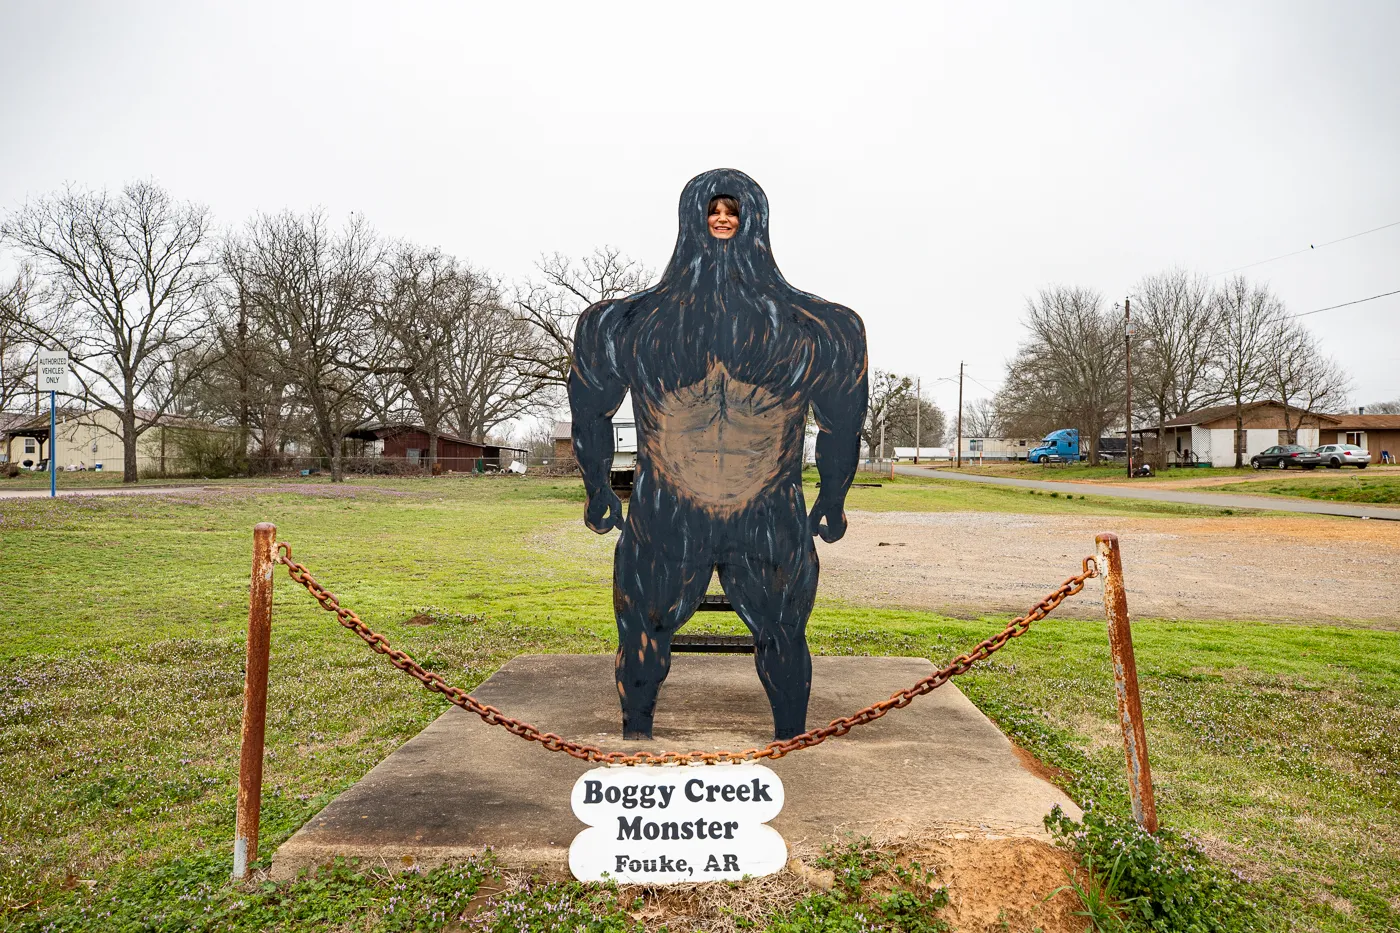 Boggy Creek Monster at Fouke Monster Mart in Fouke, Arkansas roadside attraction and convenience store